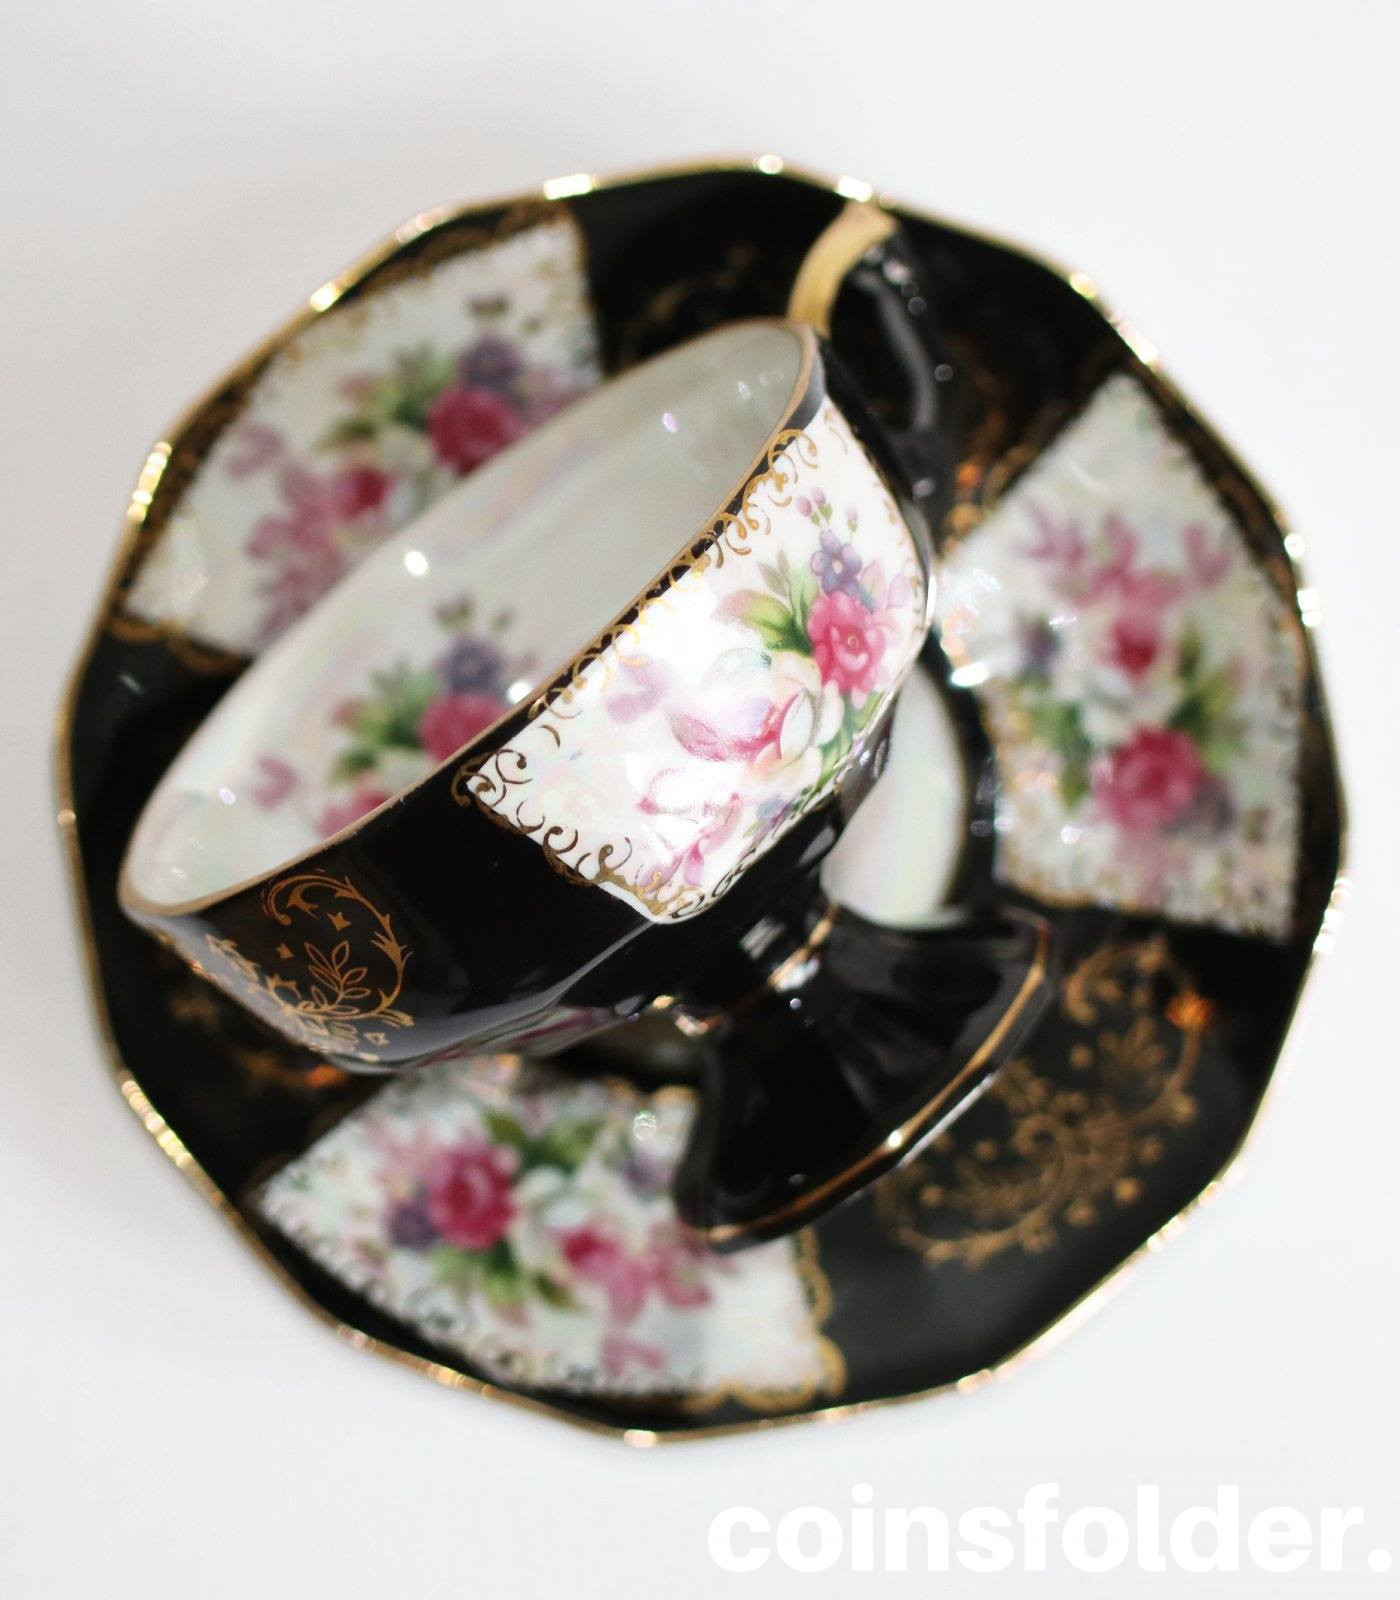 Vintage Porcelain Cup and Saucer, black with flowers